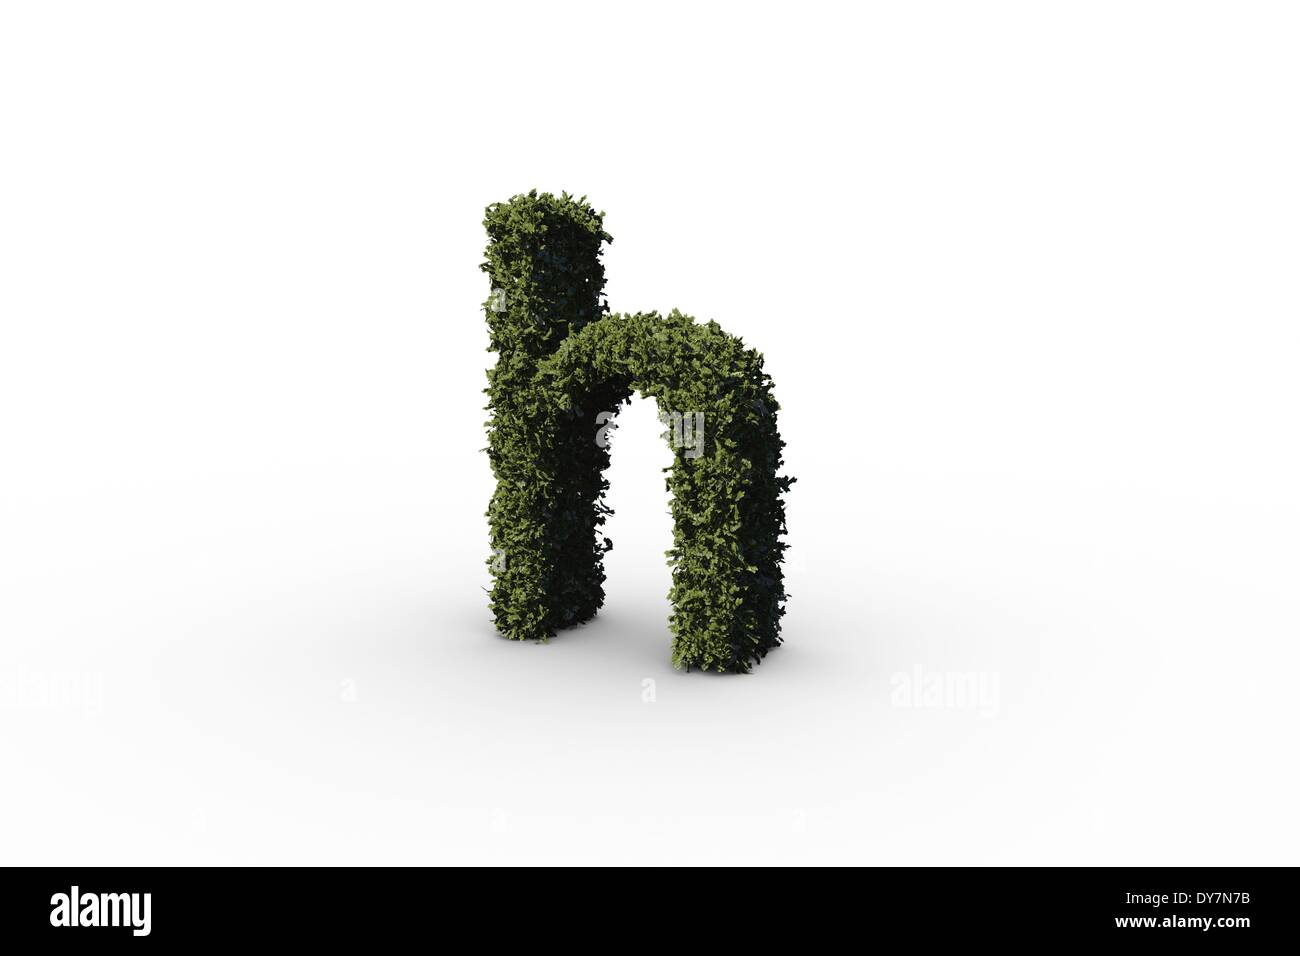 Lower case letter h made of leaves Stock Photo